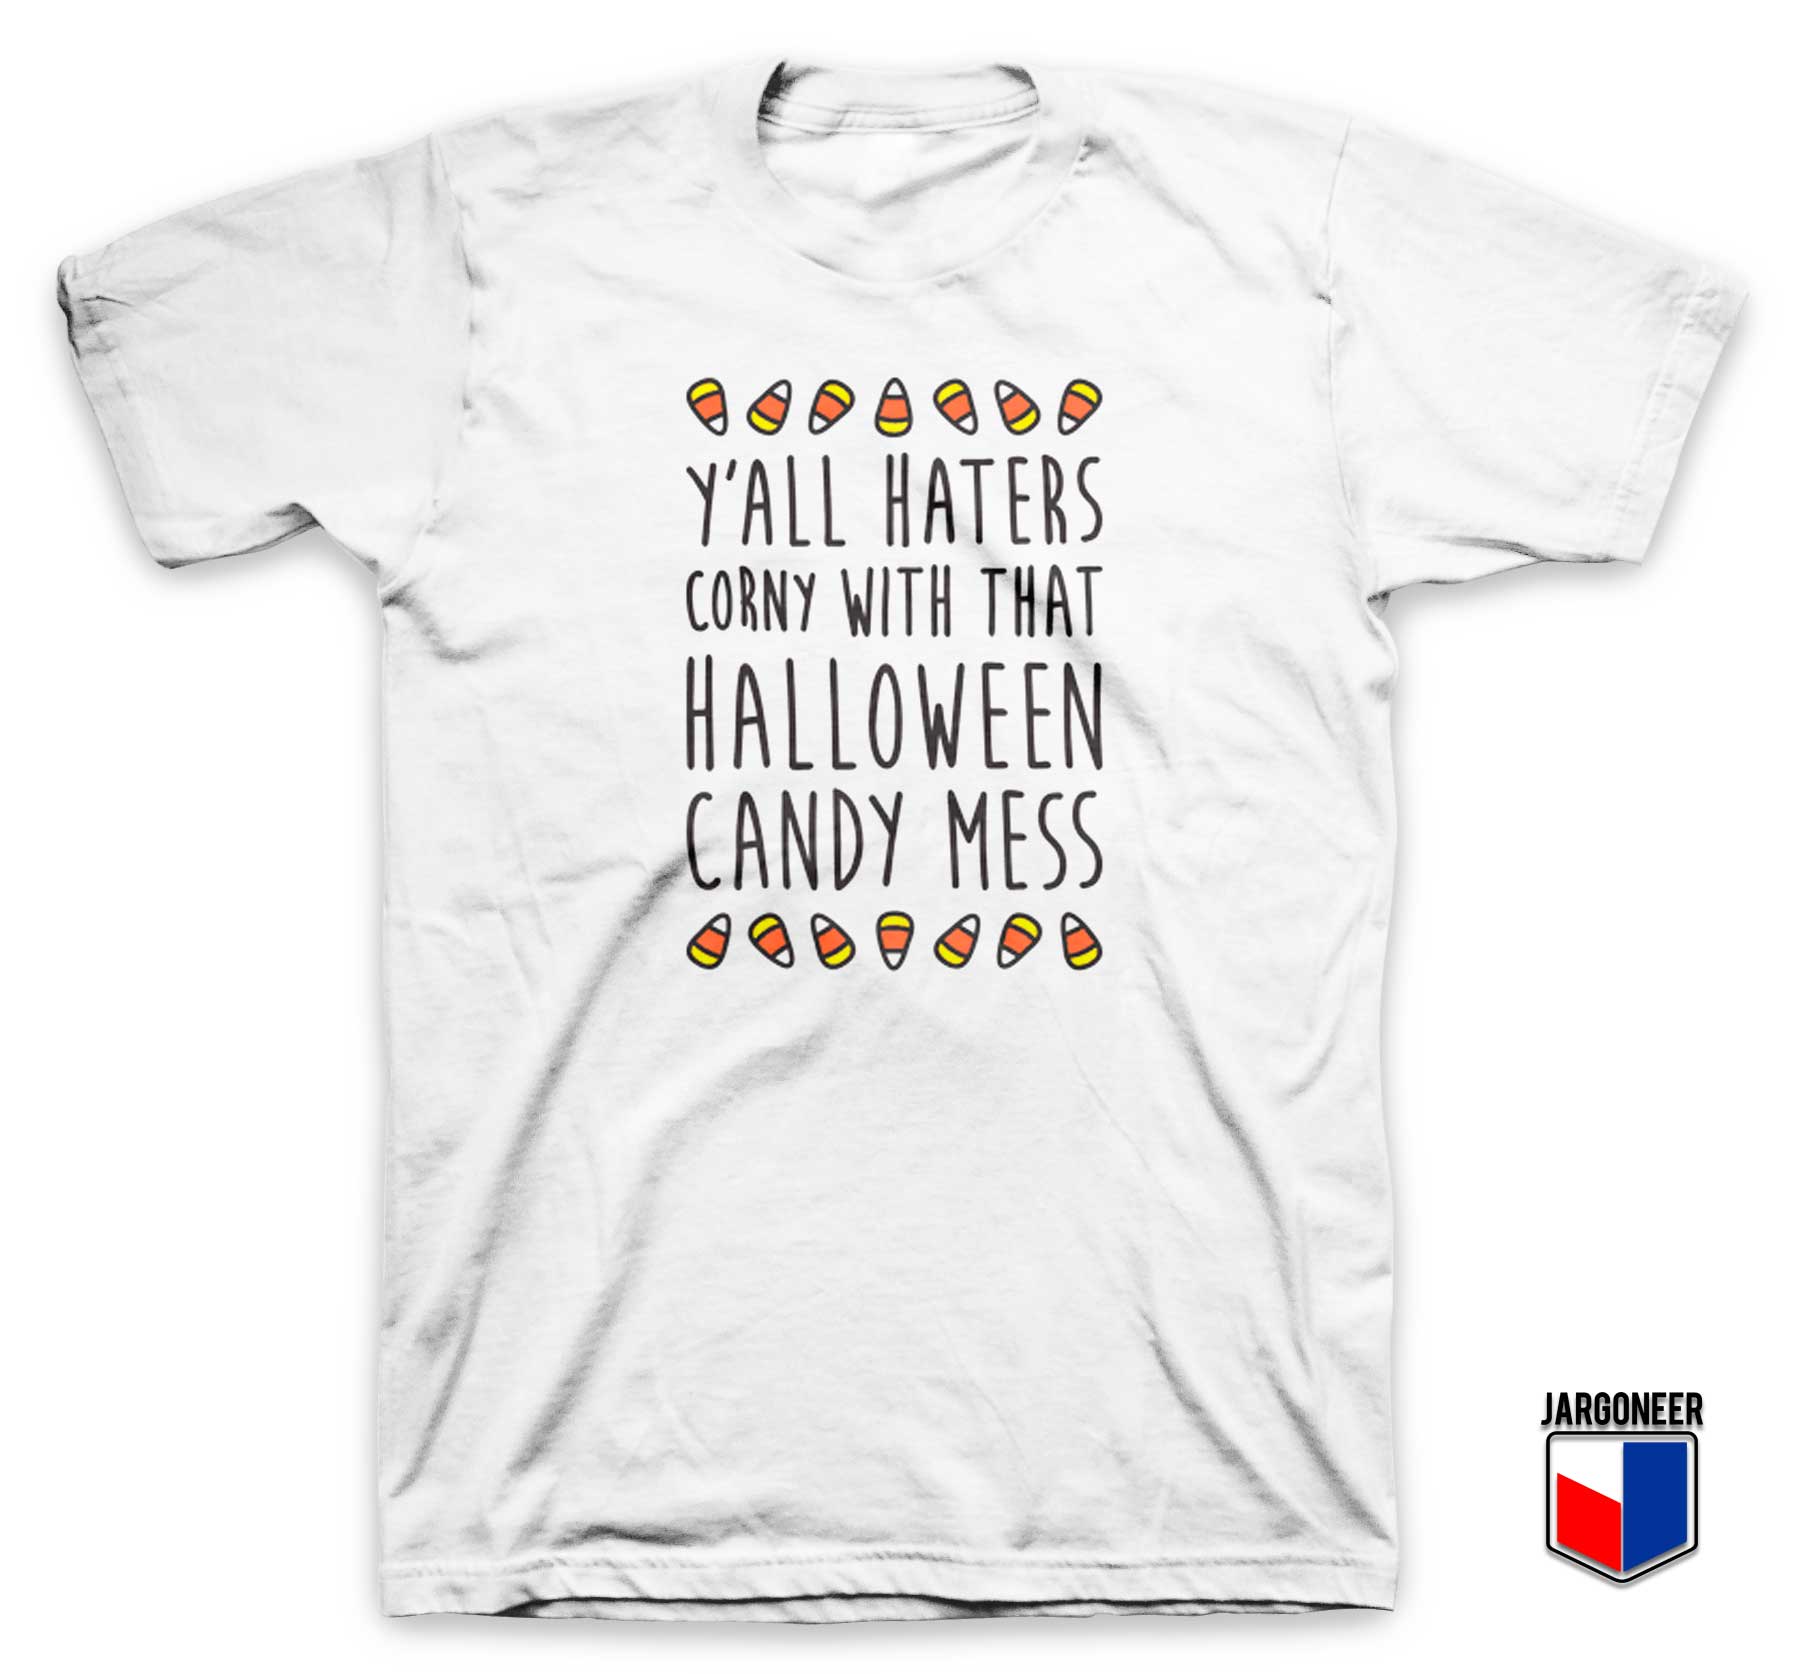 Yall Haters Corny Parody T Shirt - Shop Unique Graphic Cool Shirt Designs